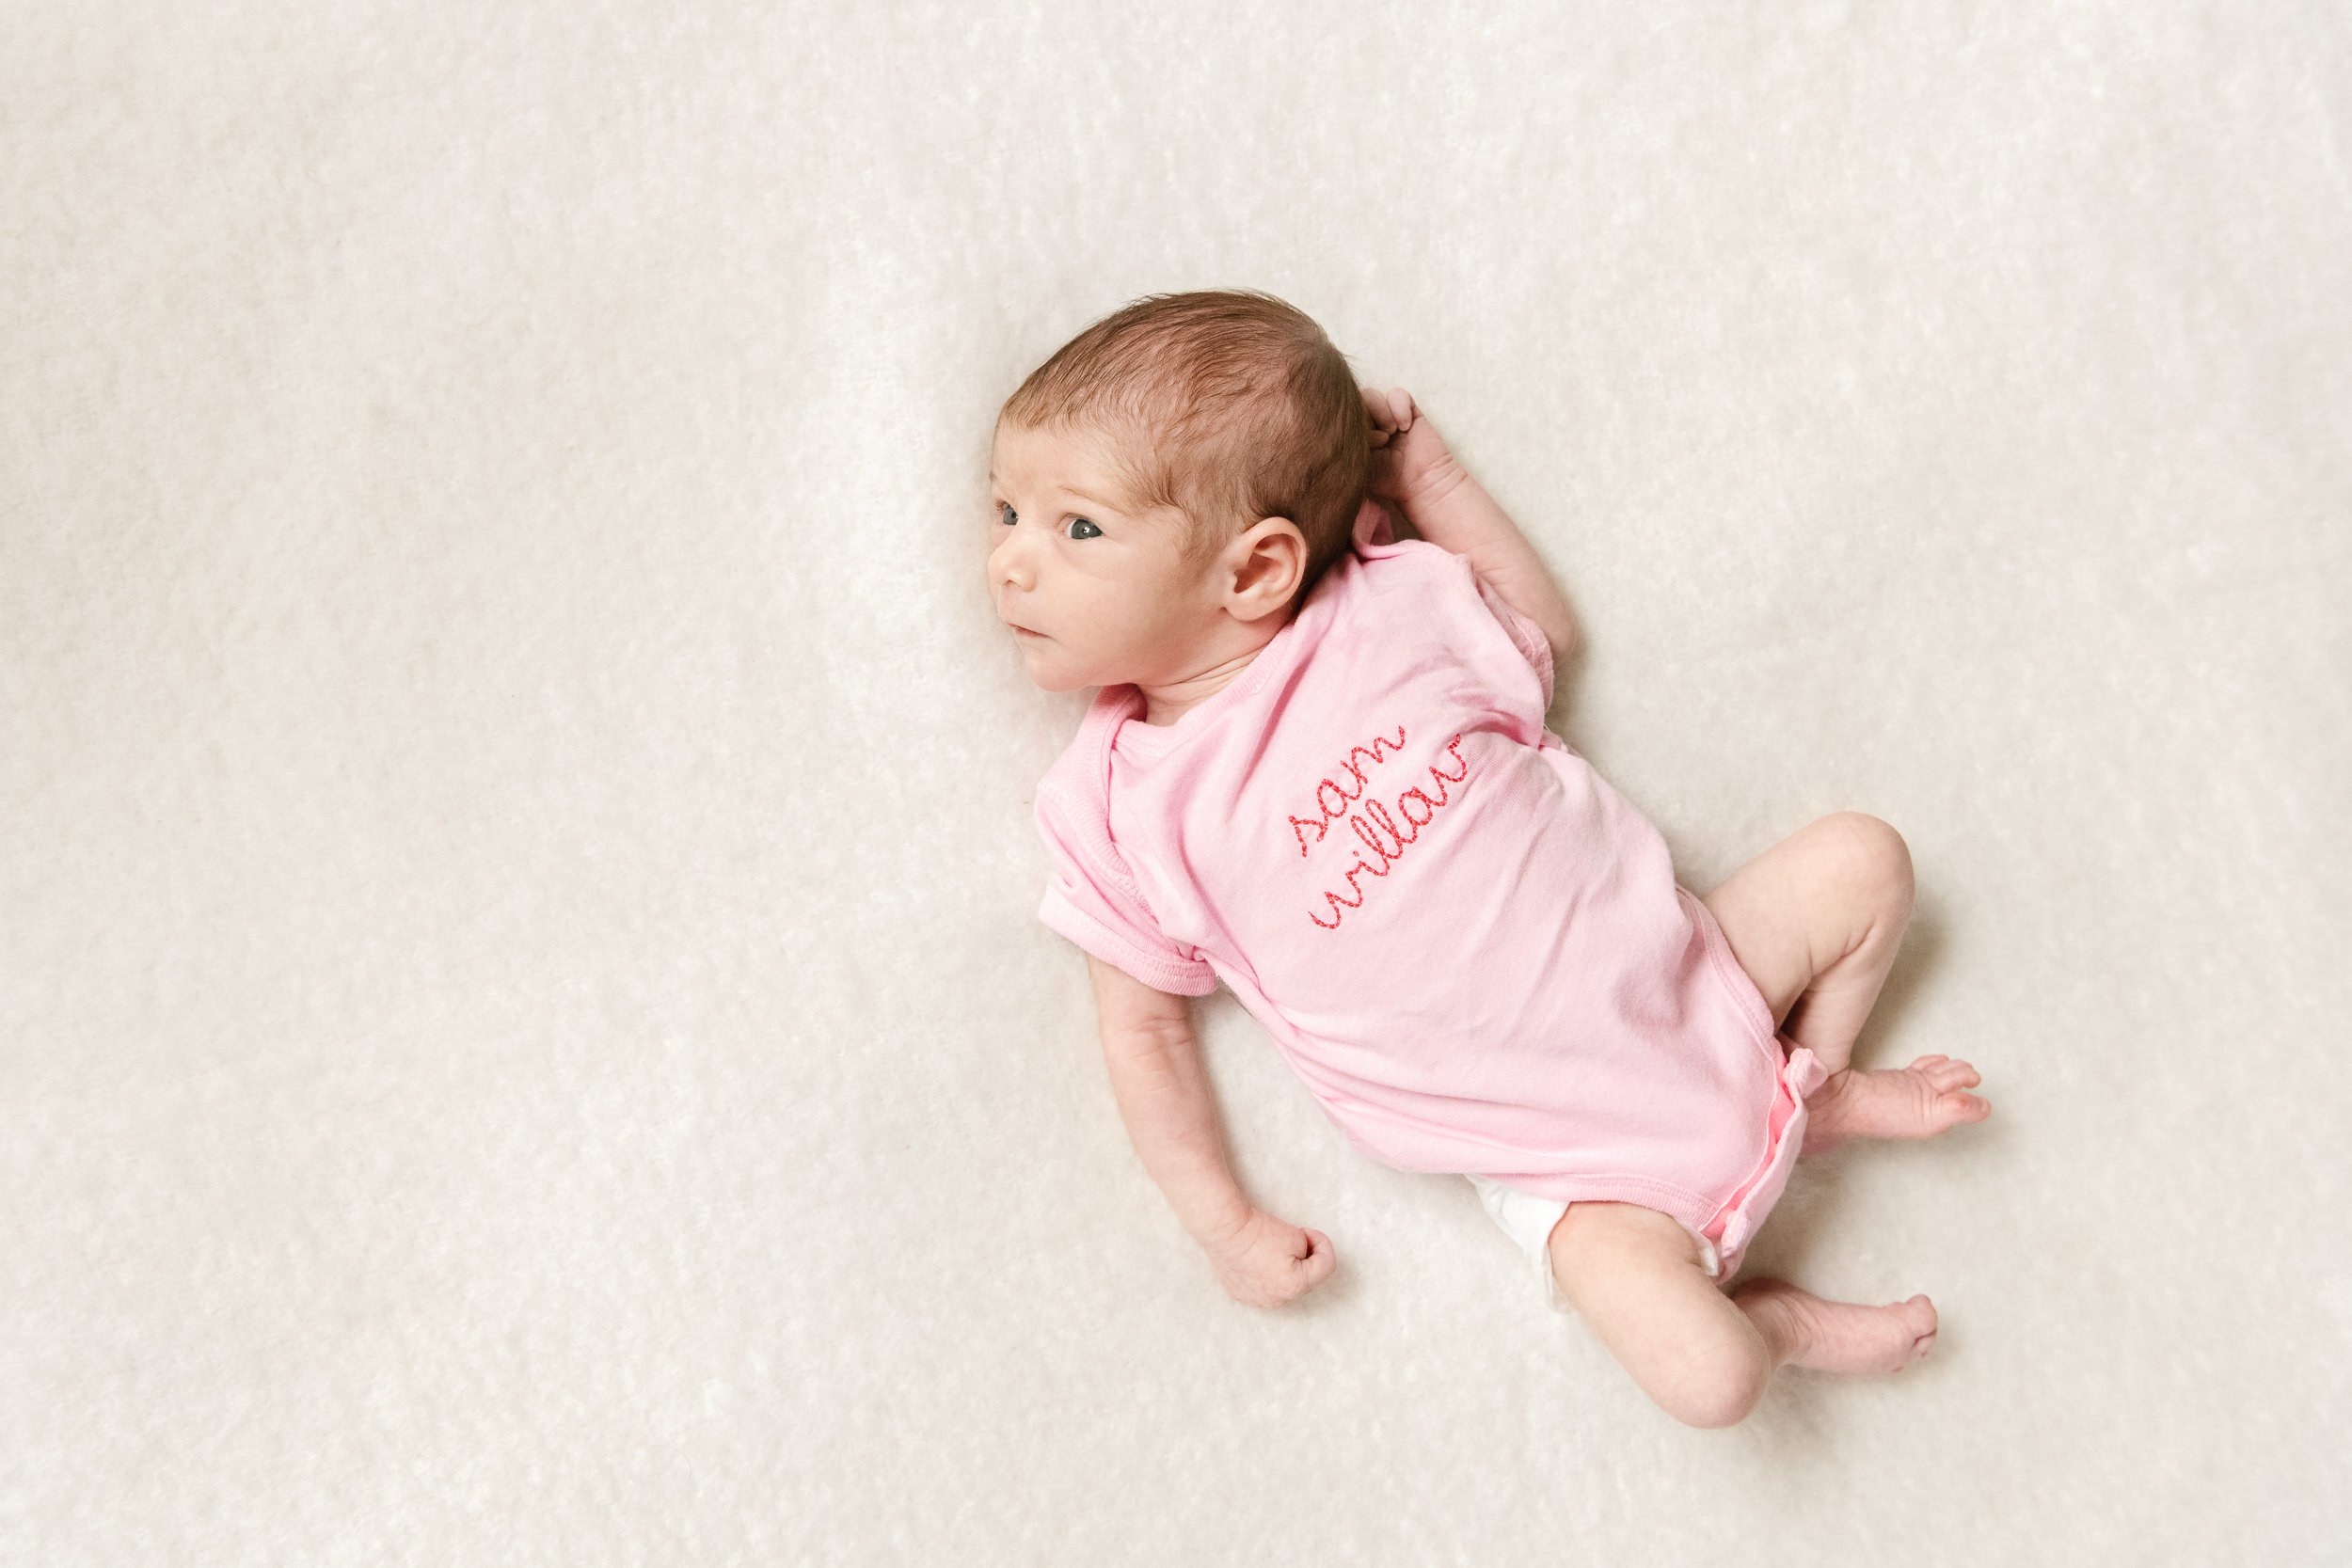  Baby girl in a pink onesie during an in-home newborn session with Nicole Hawkins Photography in Northern NJ. newborn baby portrait #nicolehawkinsphotography #NJfamilyphotographer #inhomenewbornsession #nicolehawkinsnewborns #NJnewbornphotography 